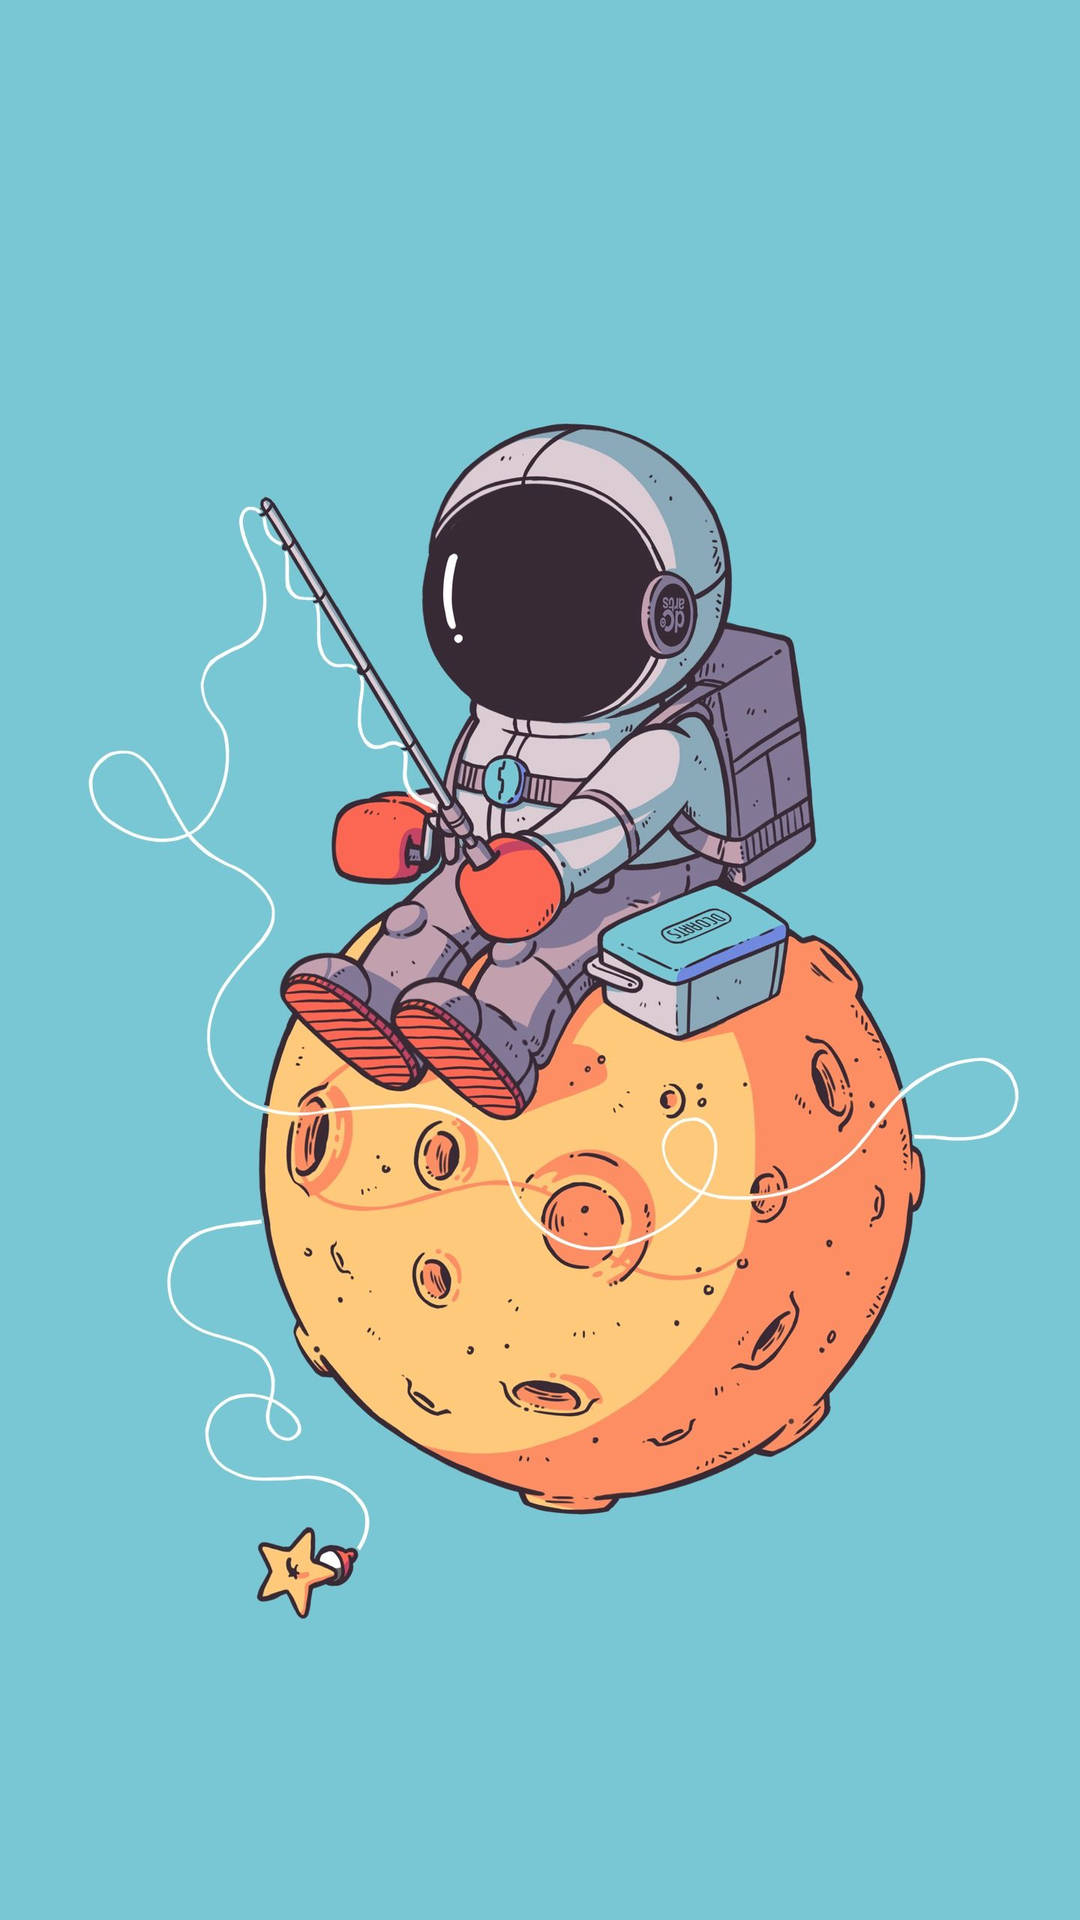 Cartoon Astronaut With A Fishing Rod Background